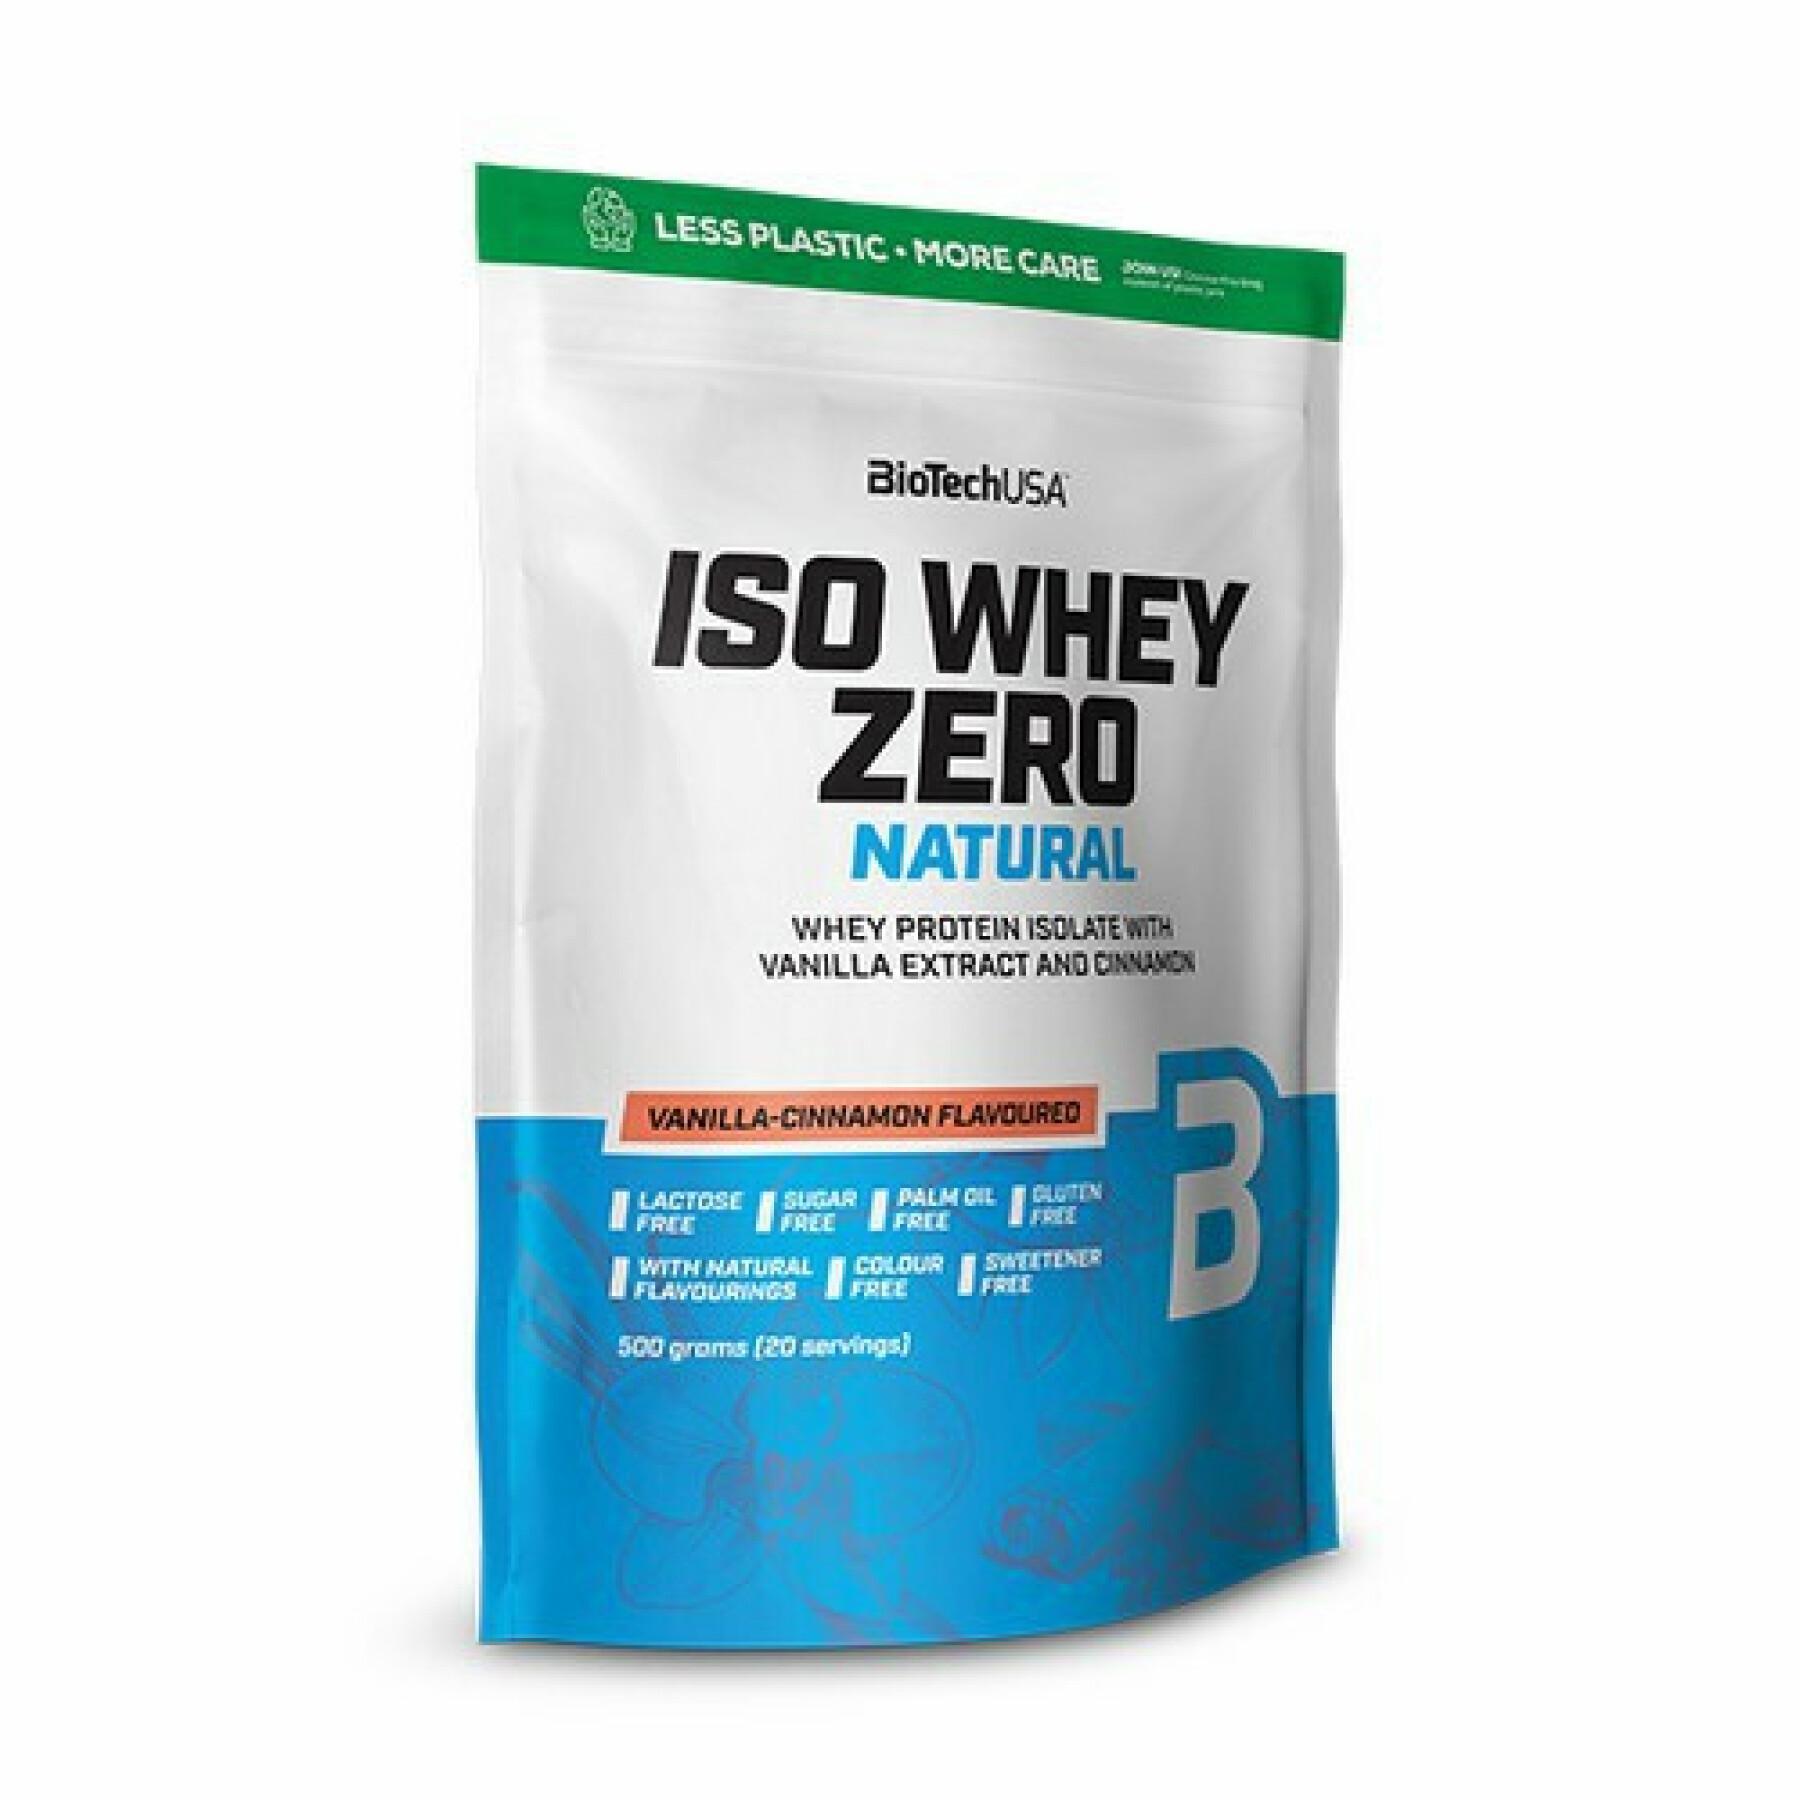 Pack of 10 bags of protein Biotech USA iso whey zero lactose free - Vanille-cannelle - 500g